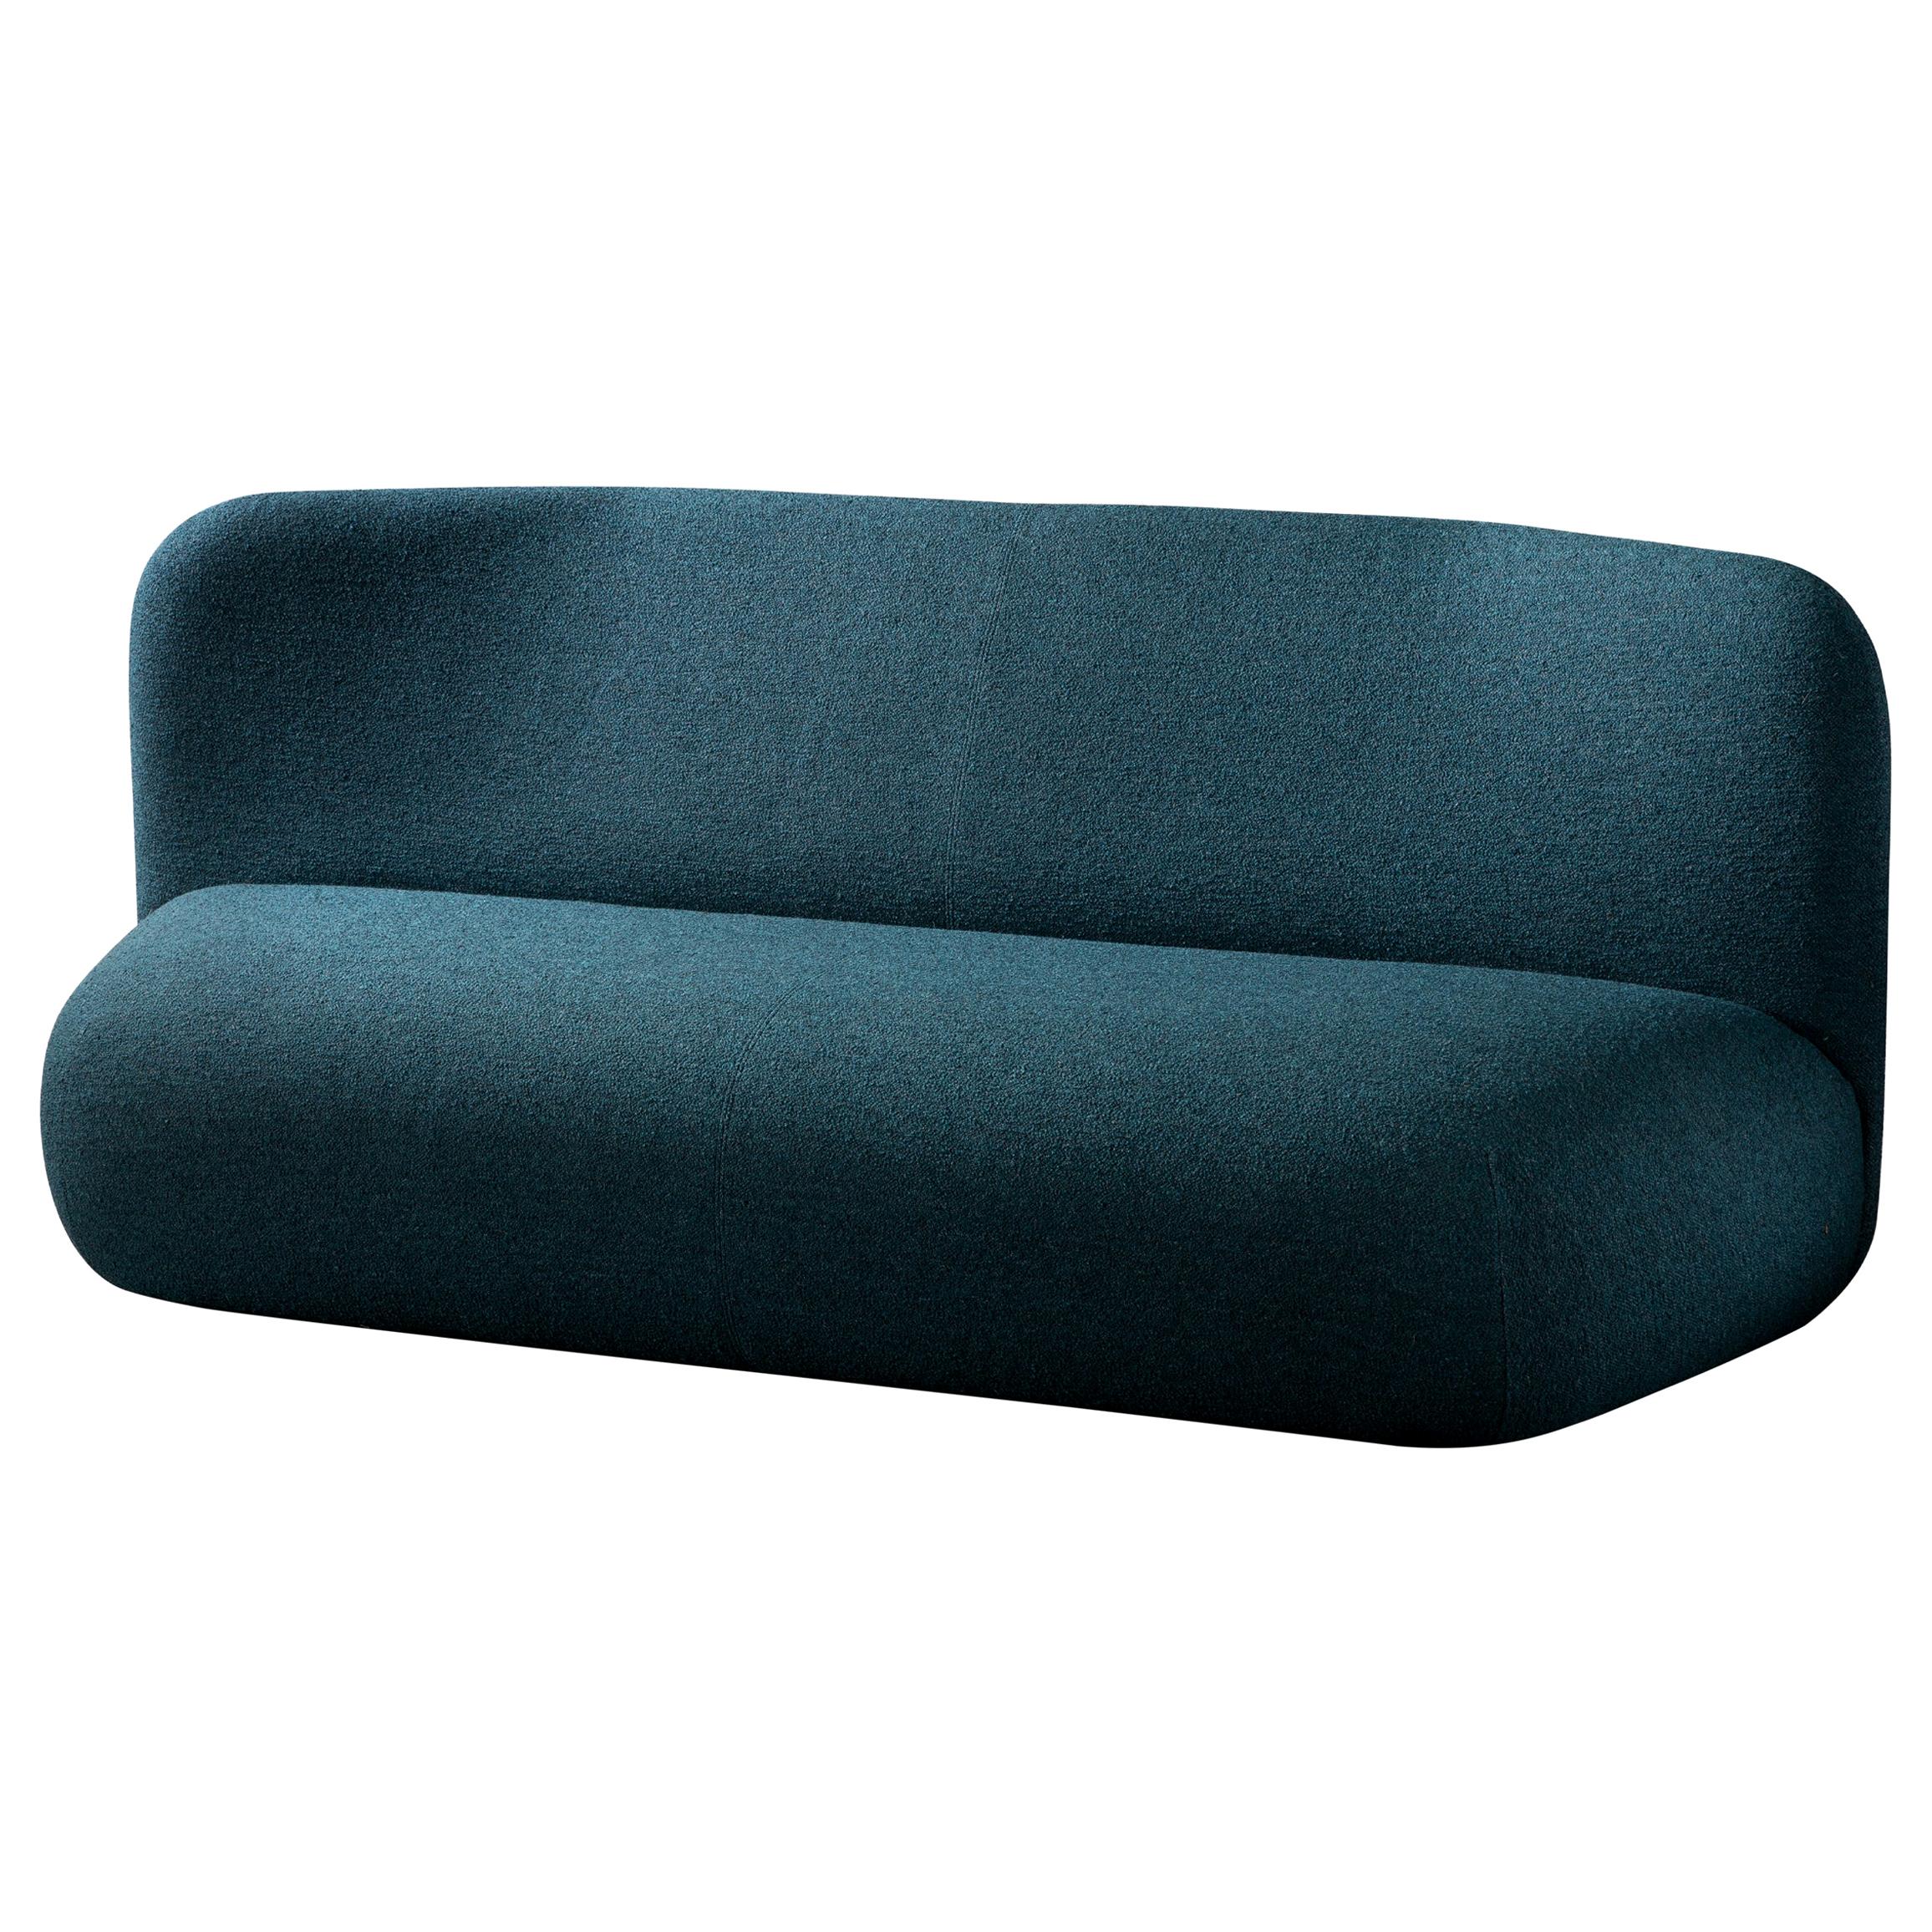 Botera Upholstered Ultramarine Blue Sofa by E-GGS For Sale